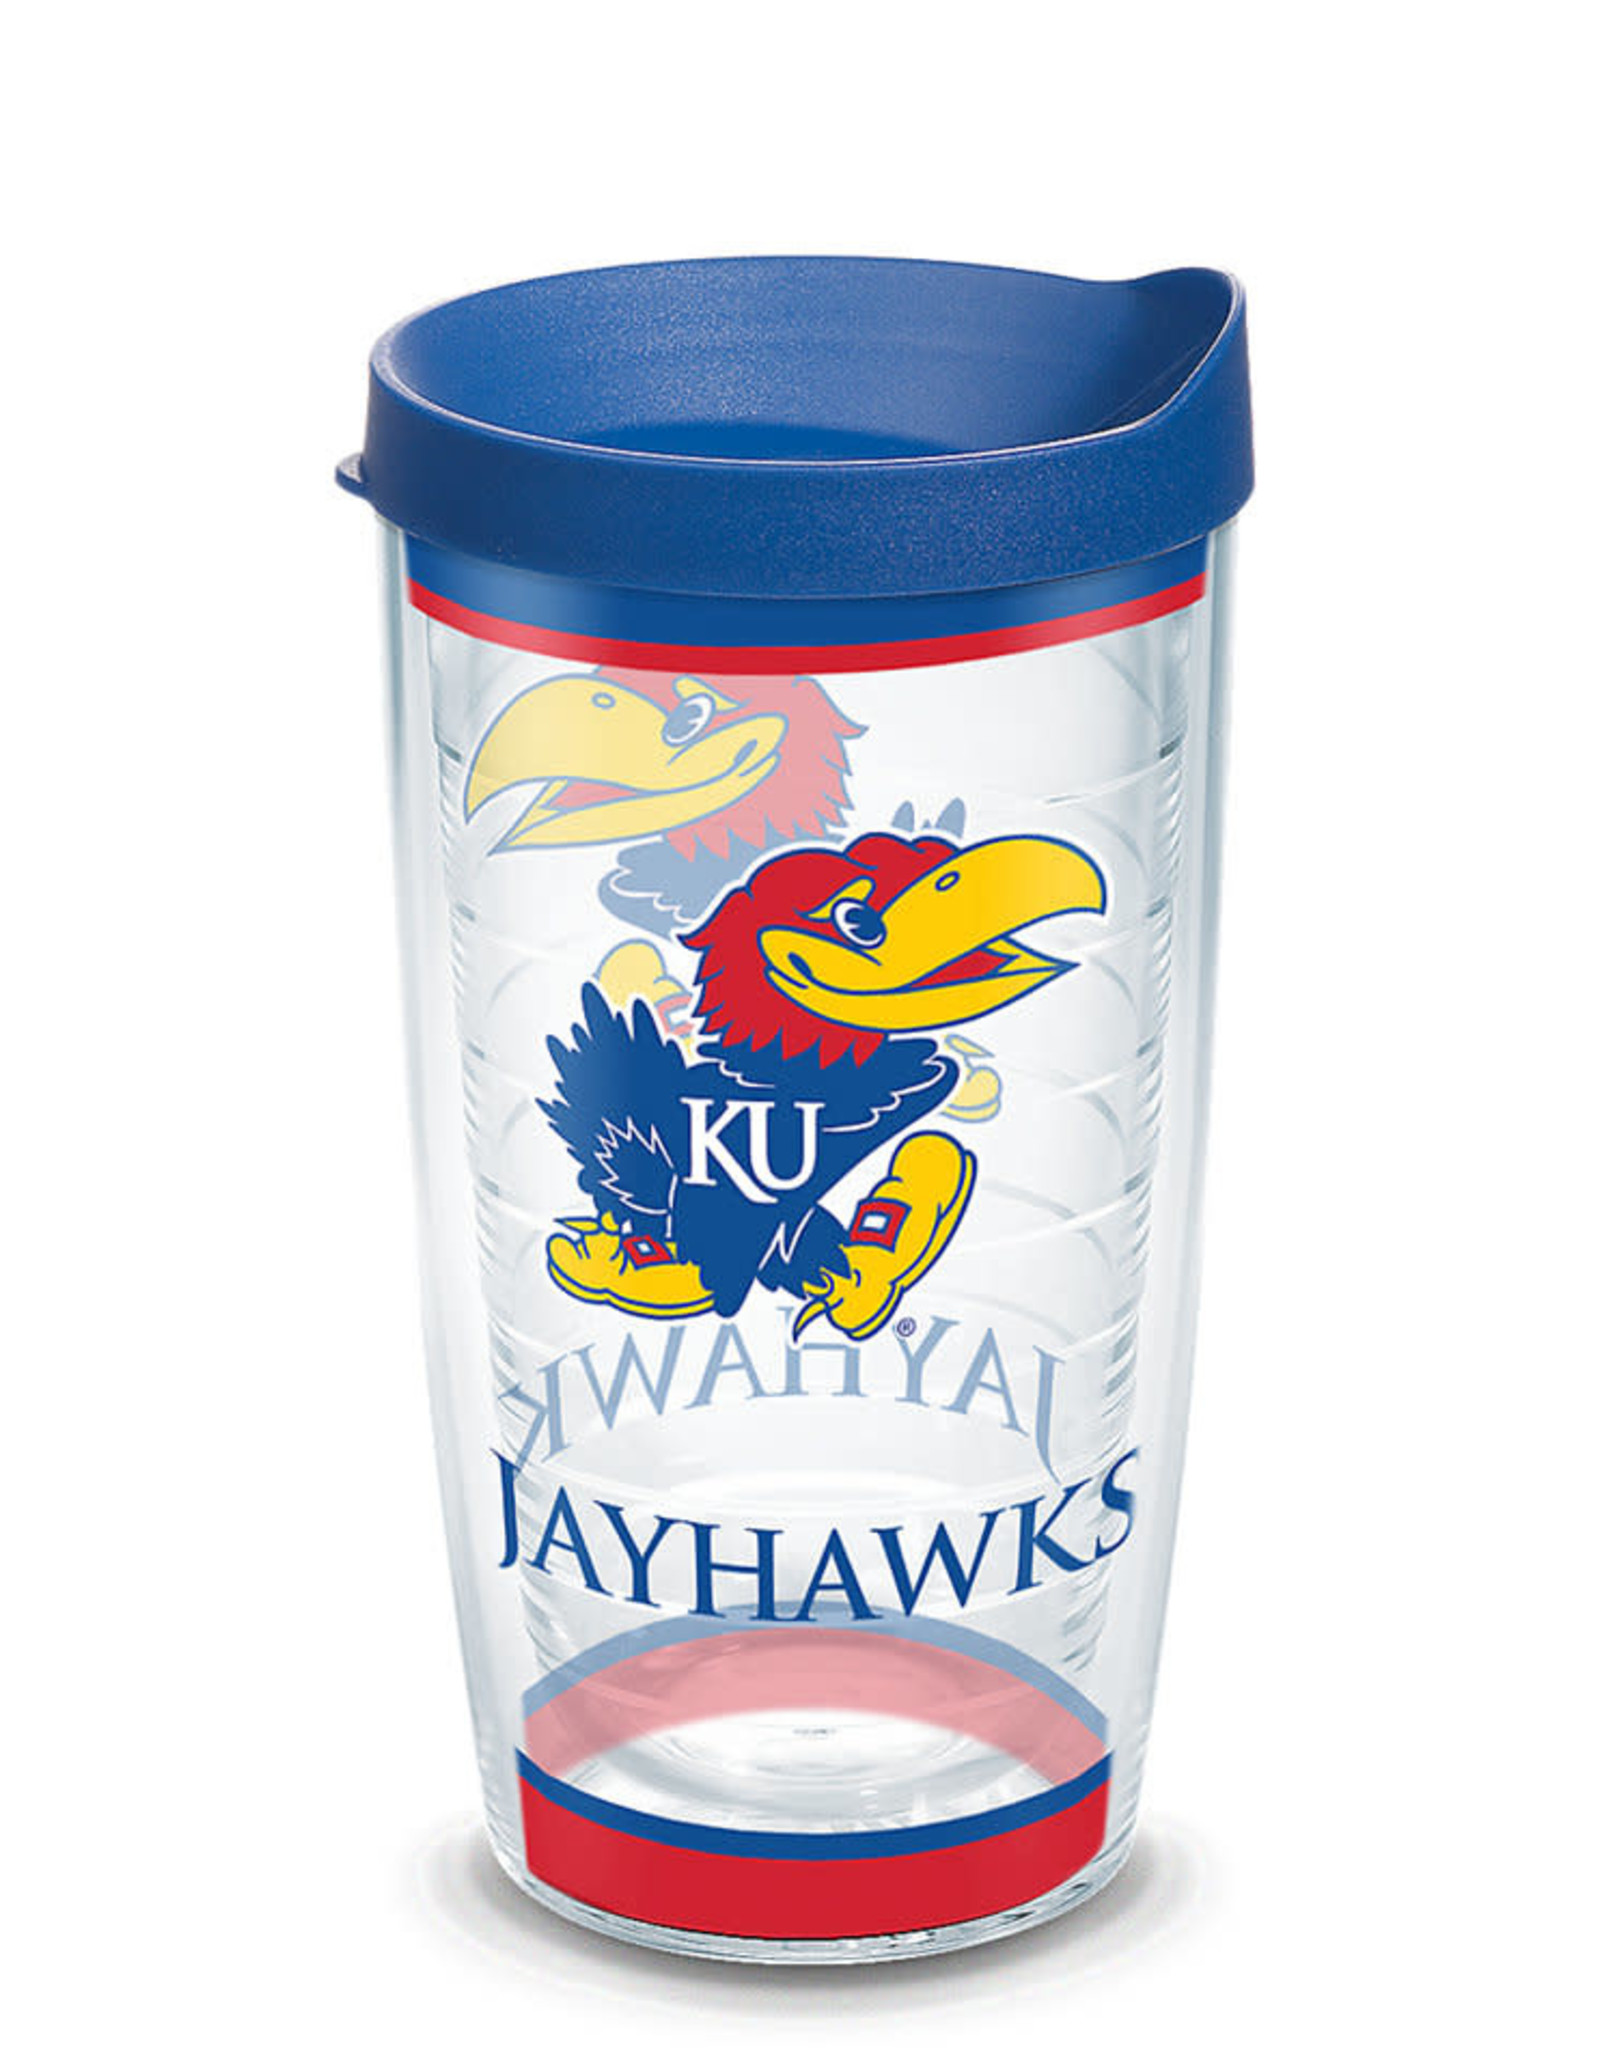 Original Tumbler by Tervis Tumbler Made in the USA - Shop